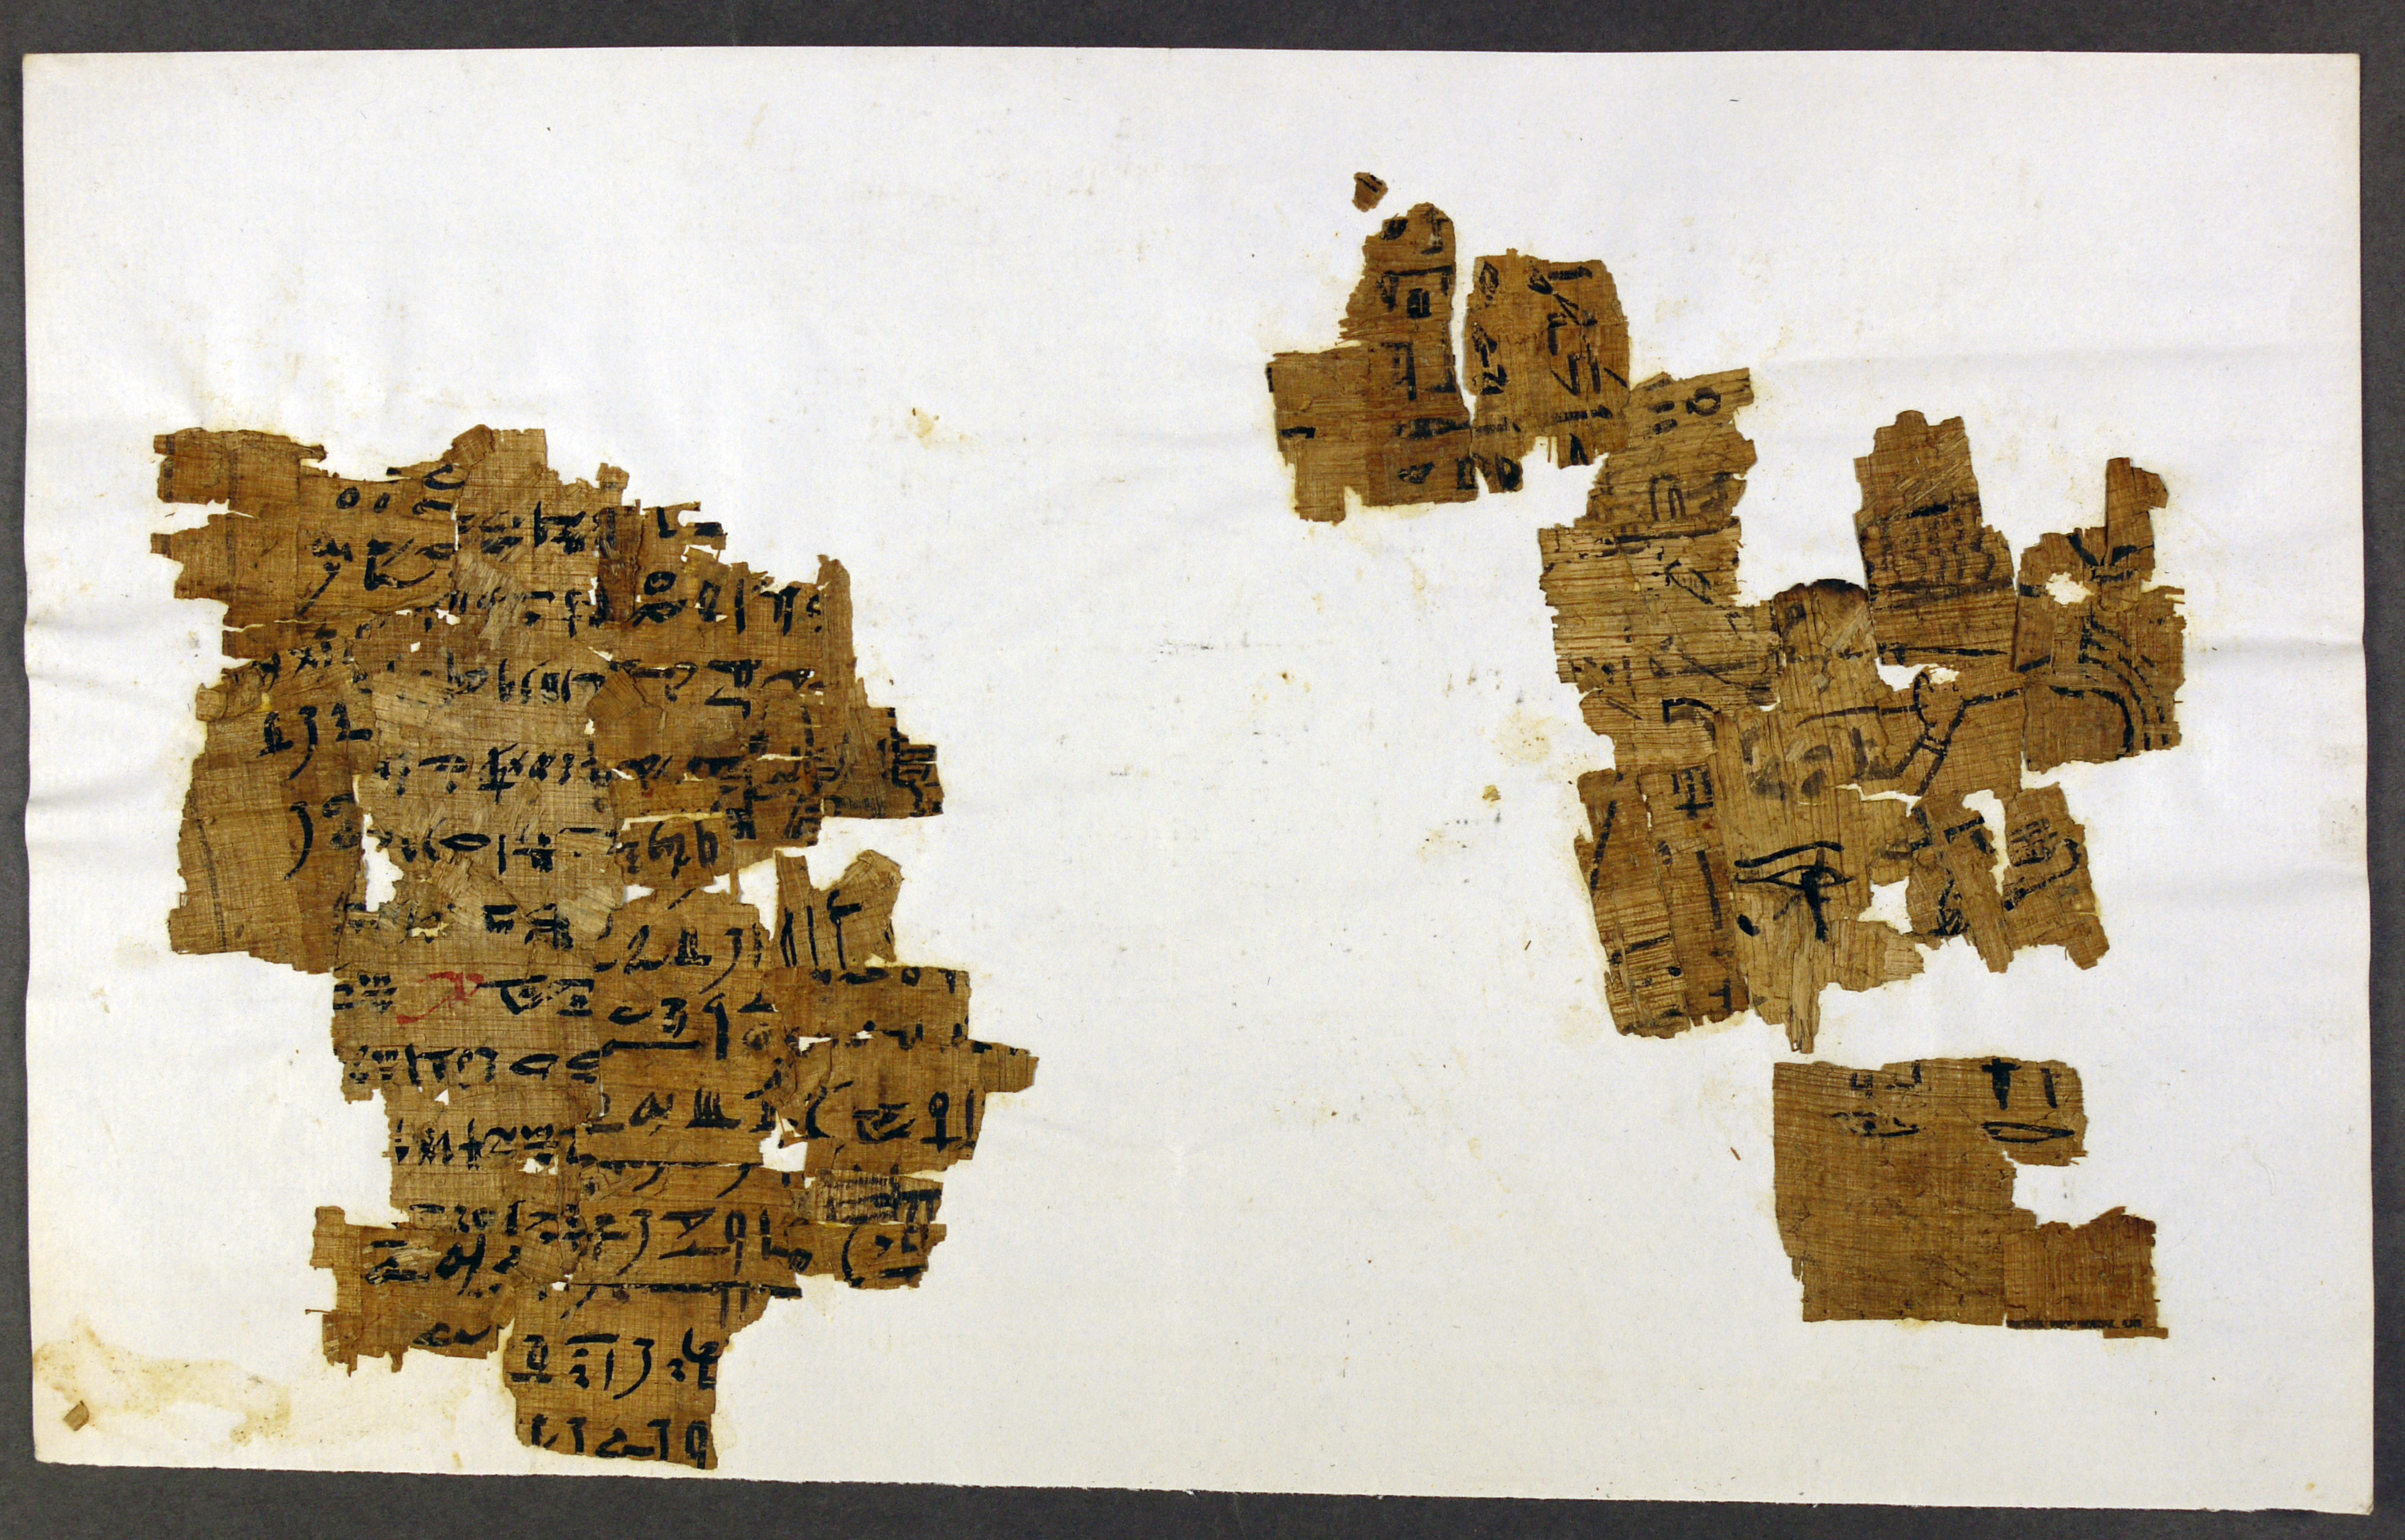 A document written on papyrus.